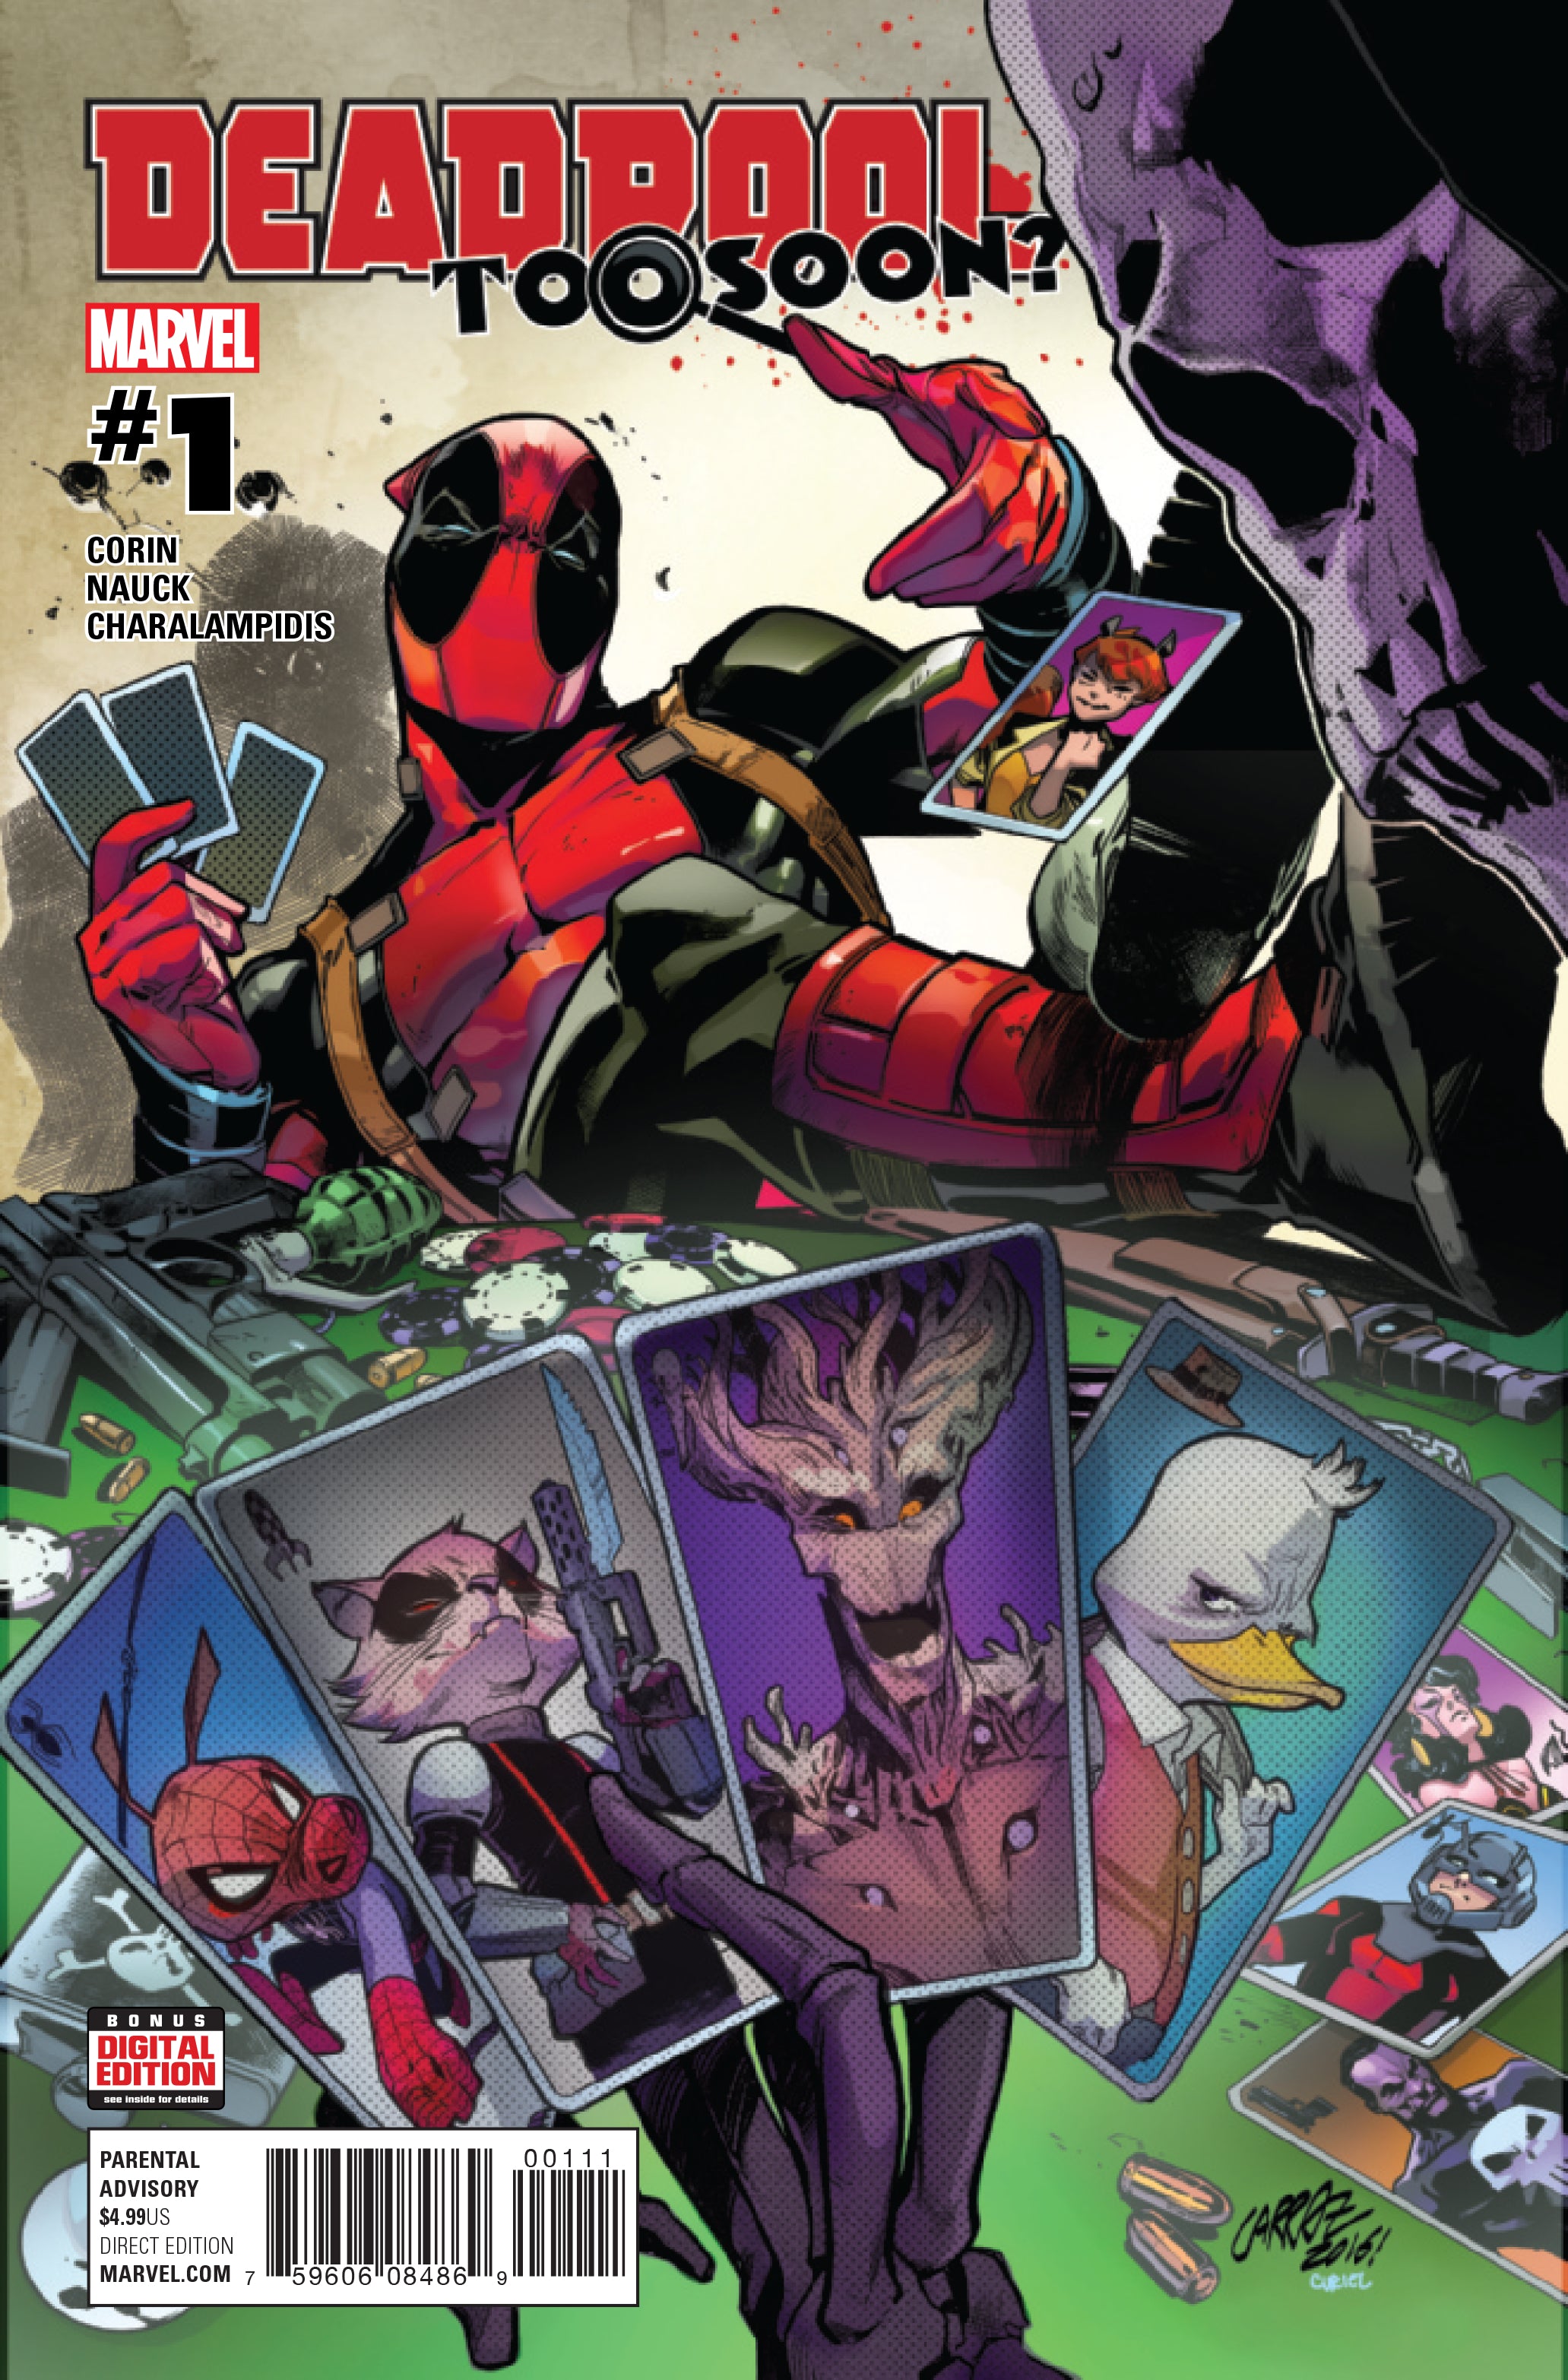 DEADPOOL TOO SOON #1 to #4 (OF 4) | Game Master's Emporium (The New GME)